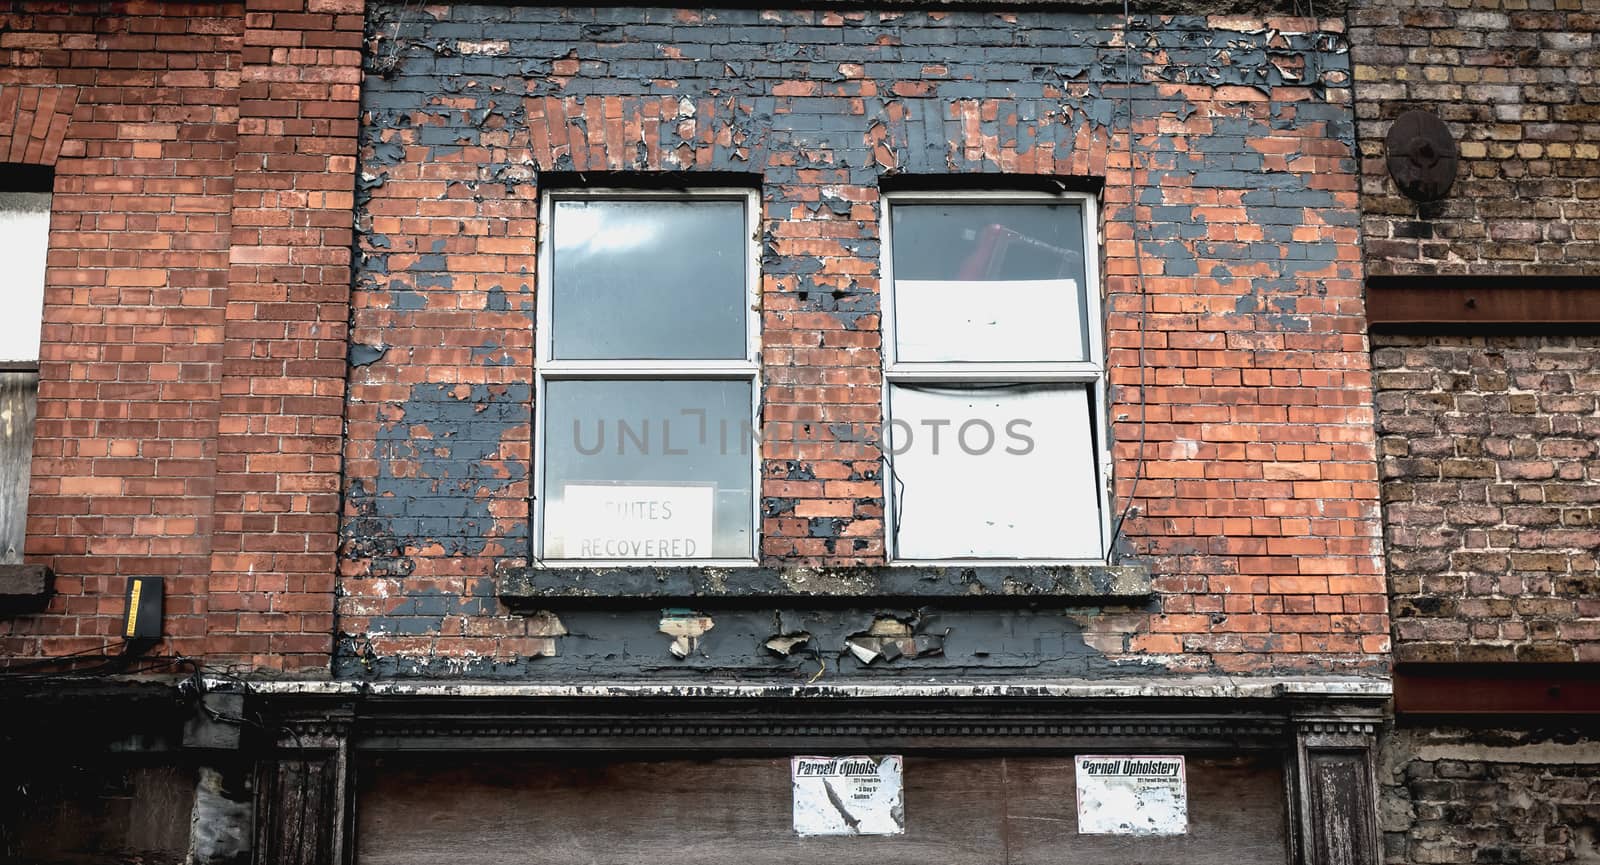 Dublin, Ireland - February 12, 2019 - suites recovered on a panel behind the window of an old dilapidated downtown building on a winter day